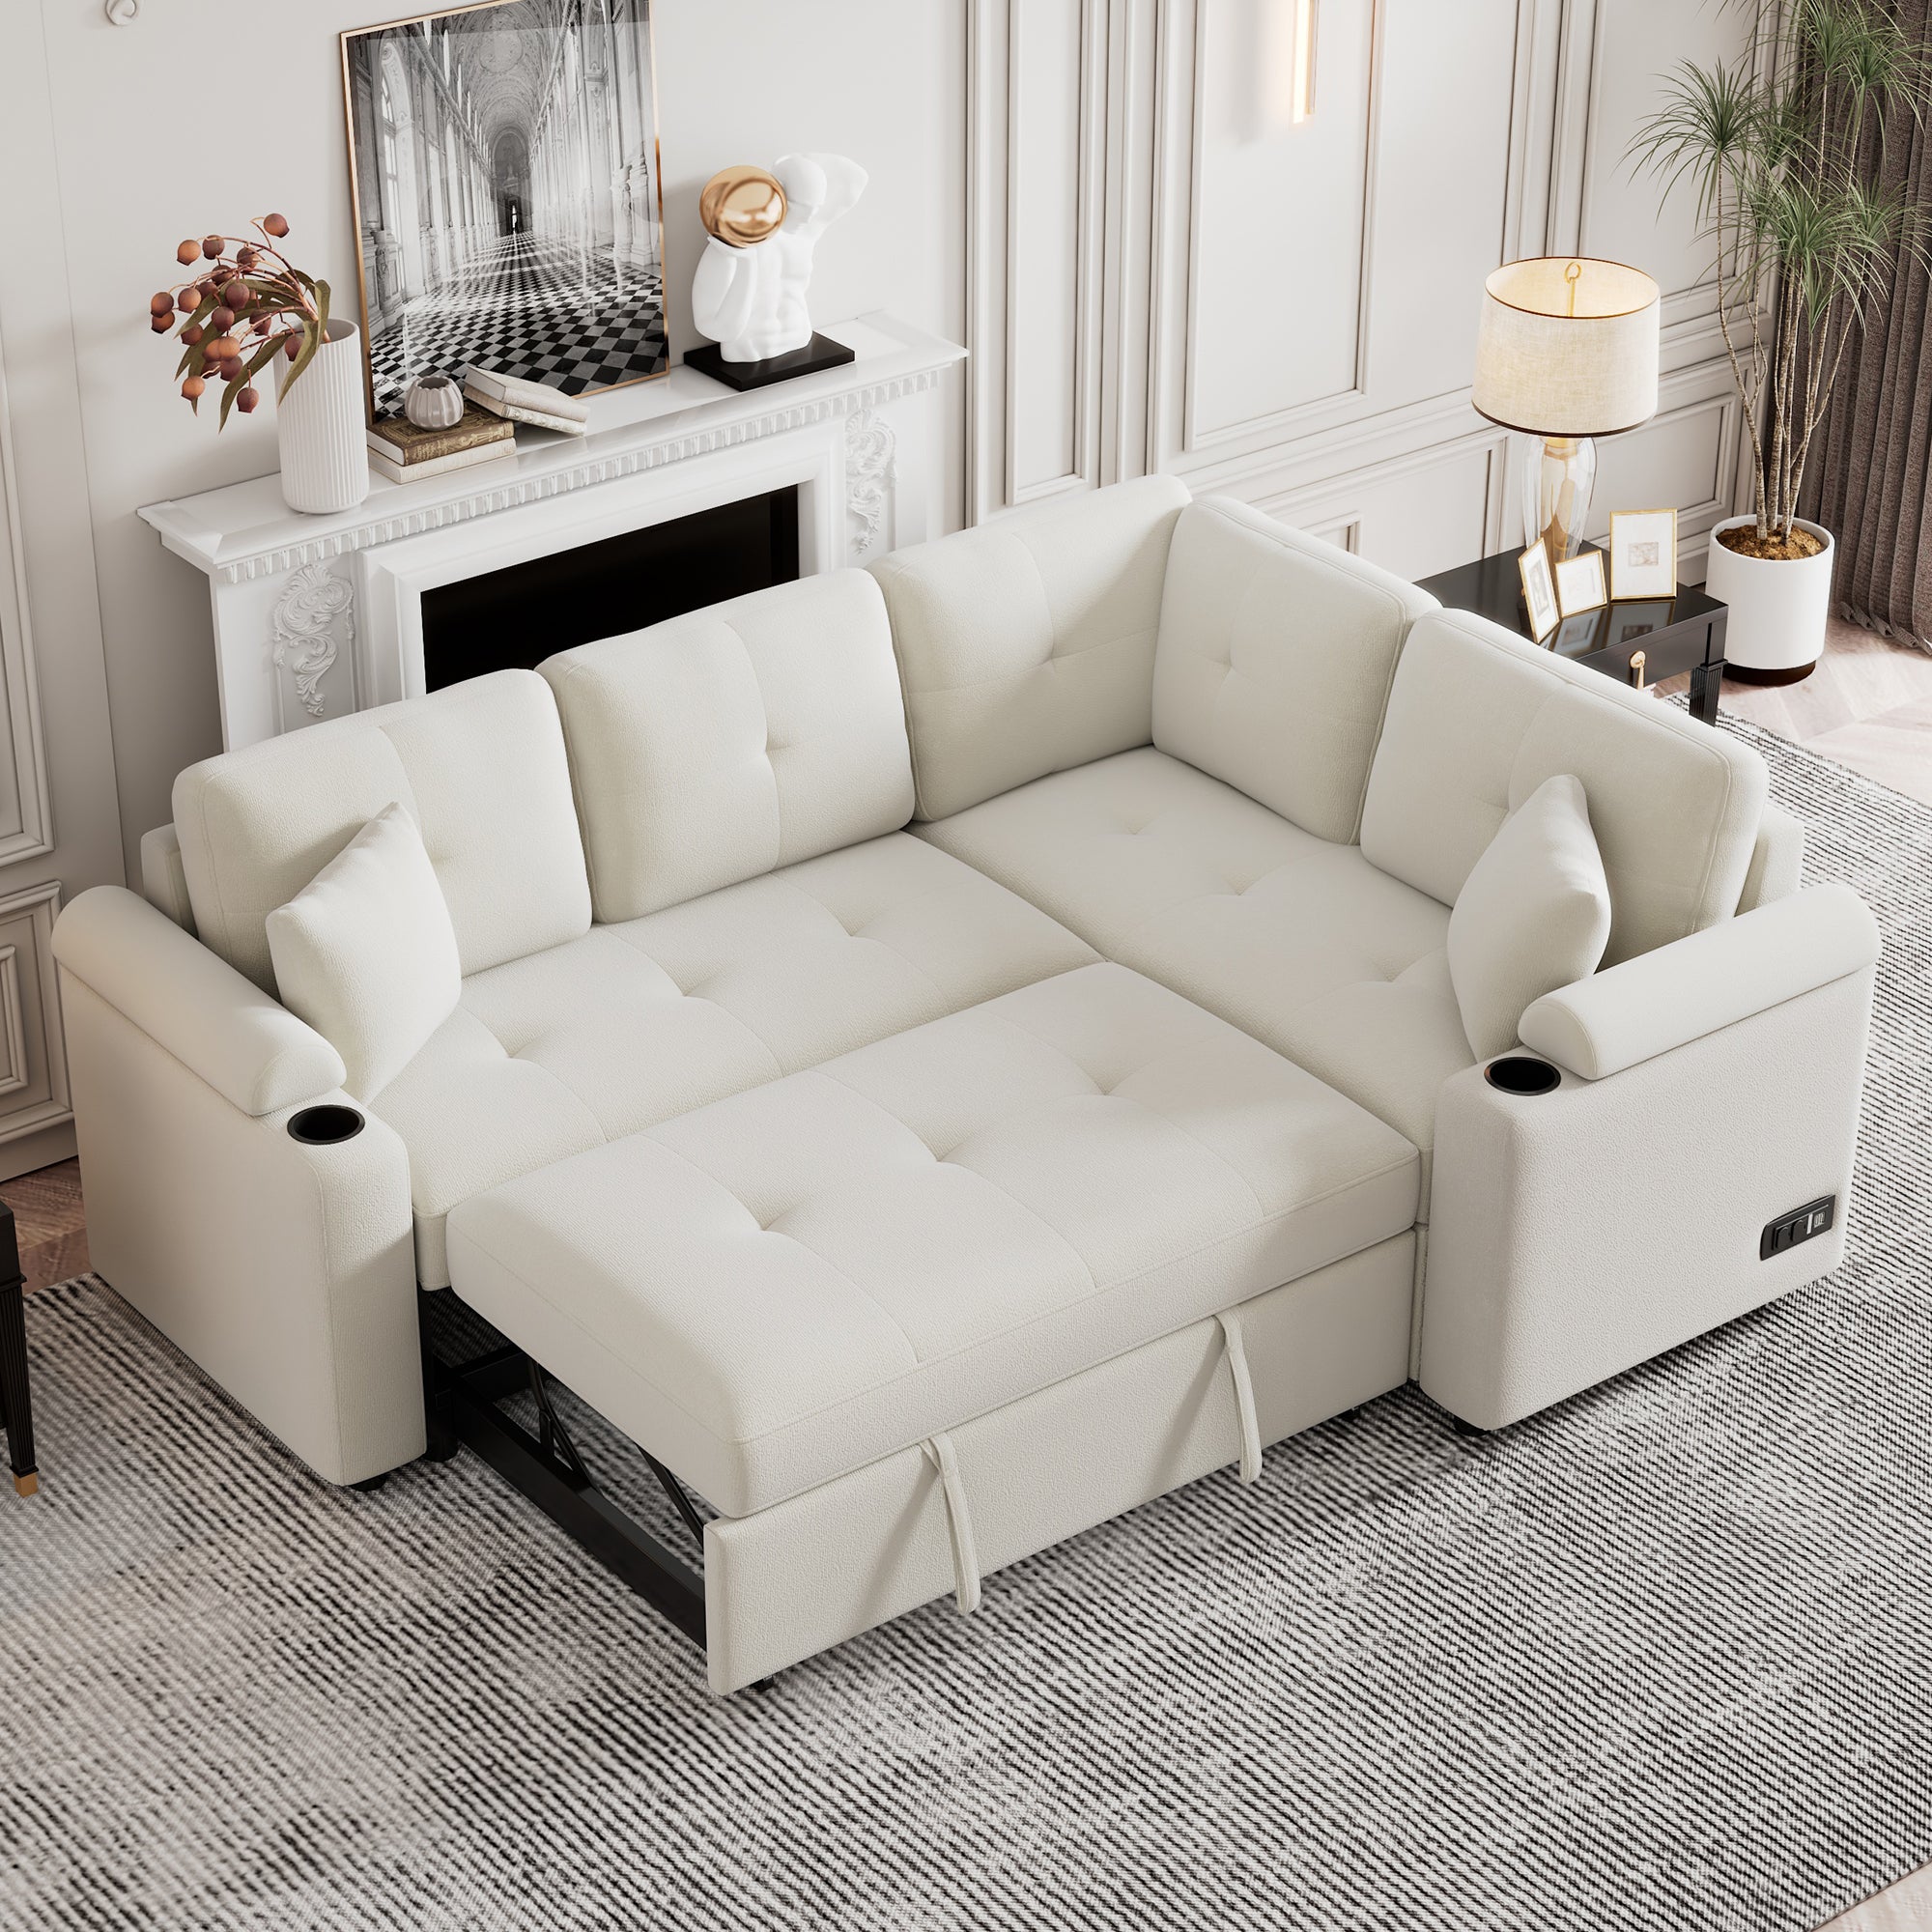 87.4" L-Shaped Boucle Sleeper Sectional Sofa - Beige - USB & Outlets